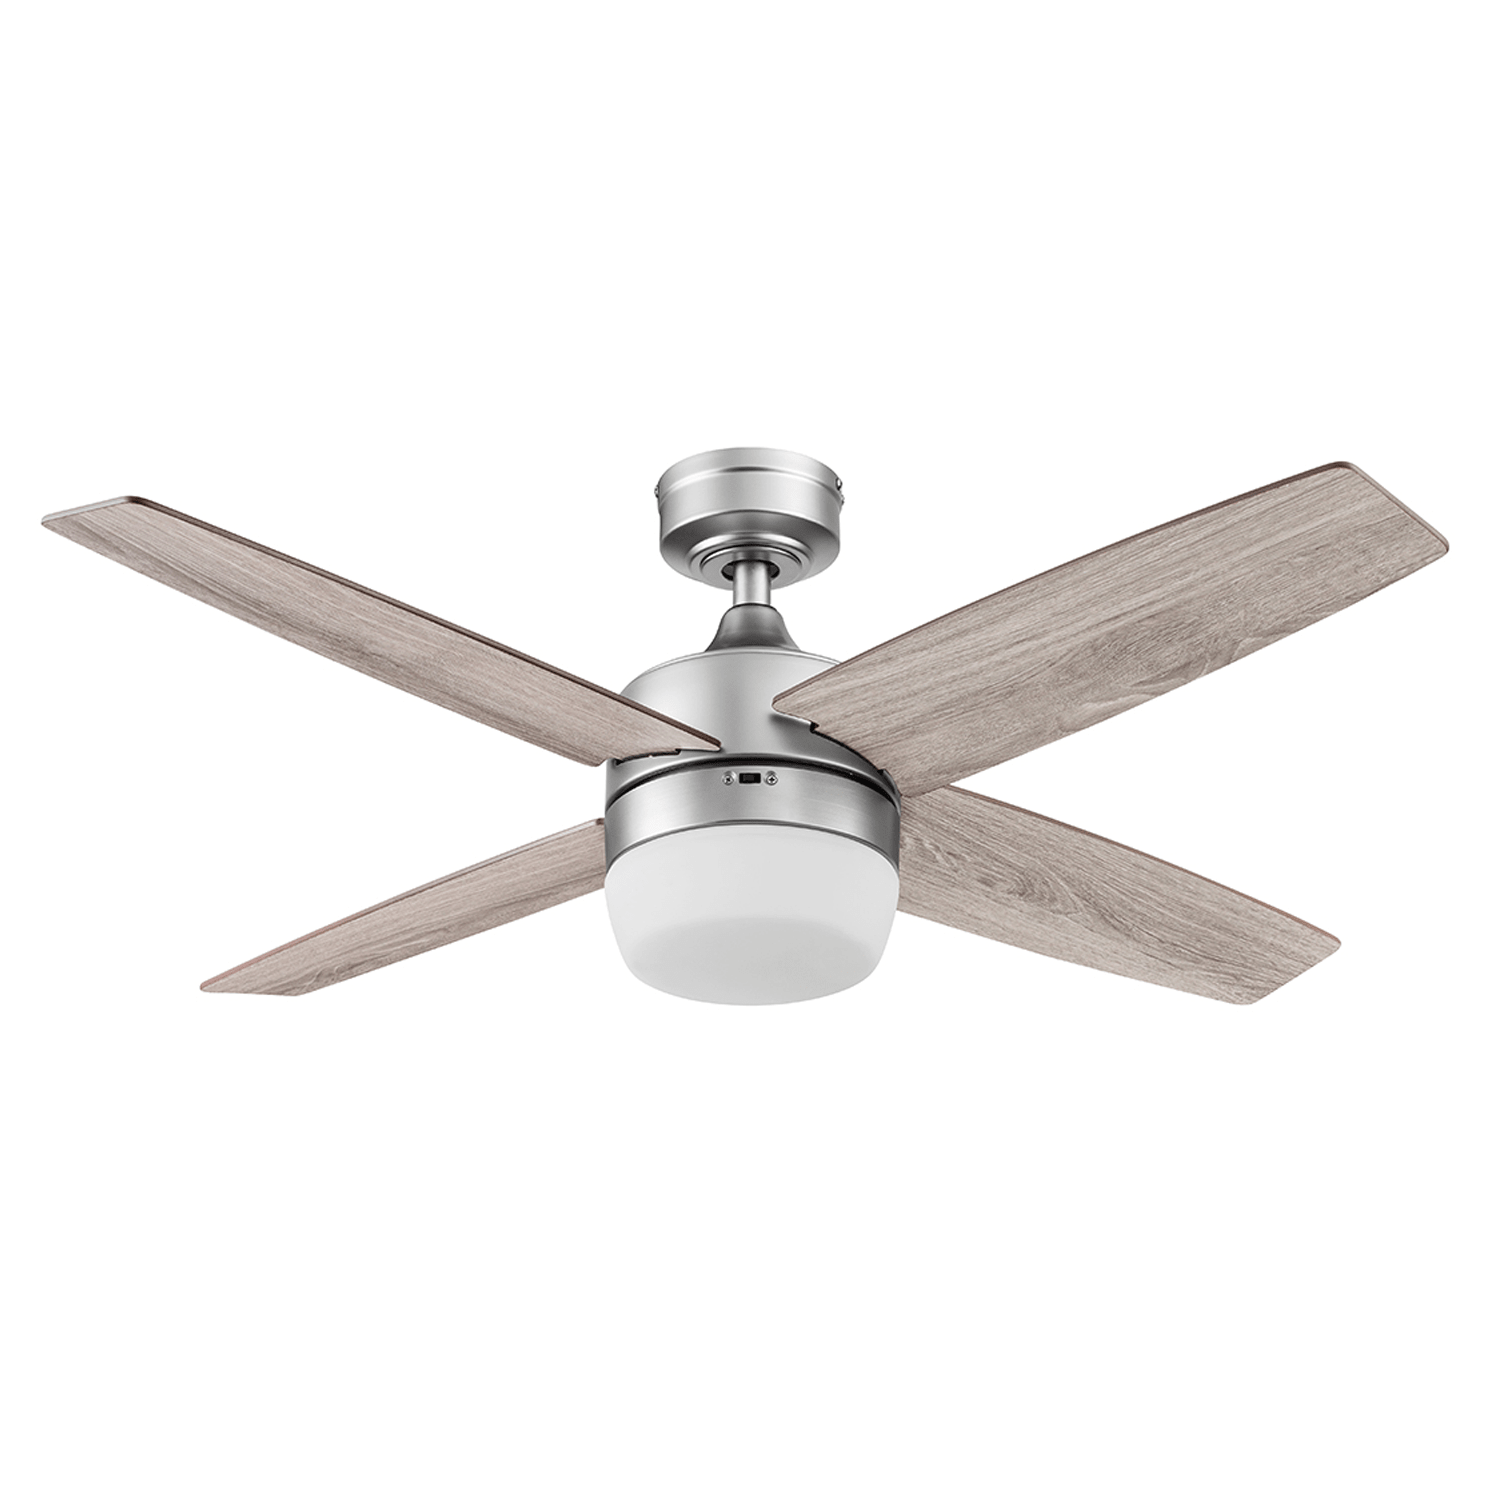 44 Inch Atlas, Pewter, Remote Control, Ceiling Fan by Prominence Home